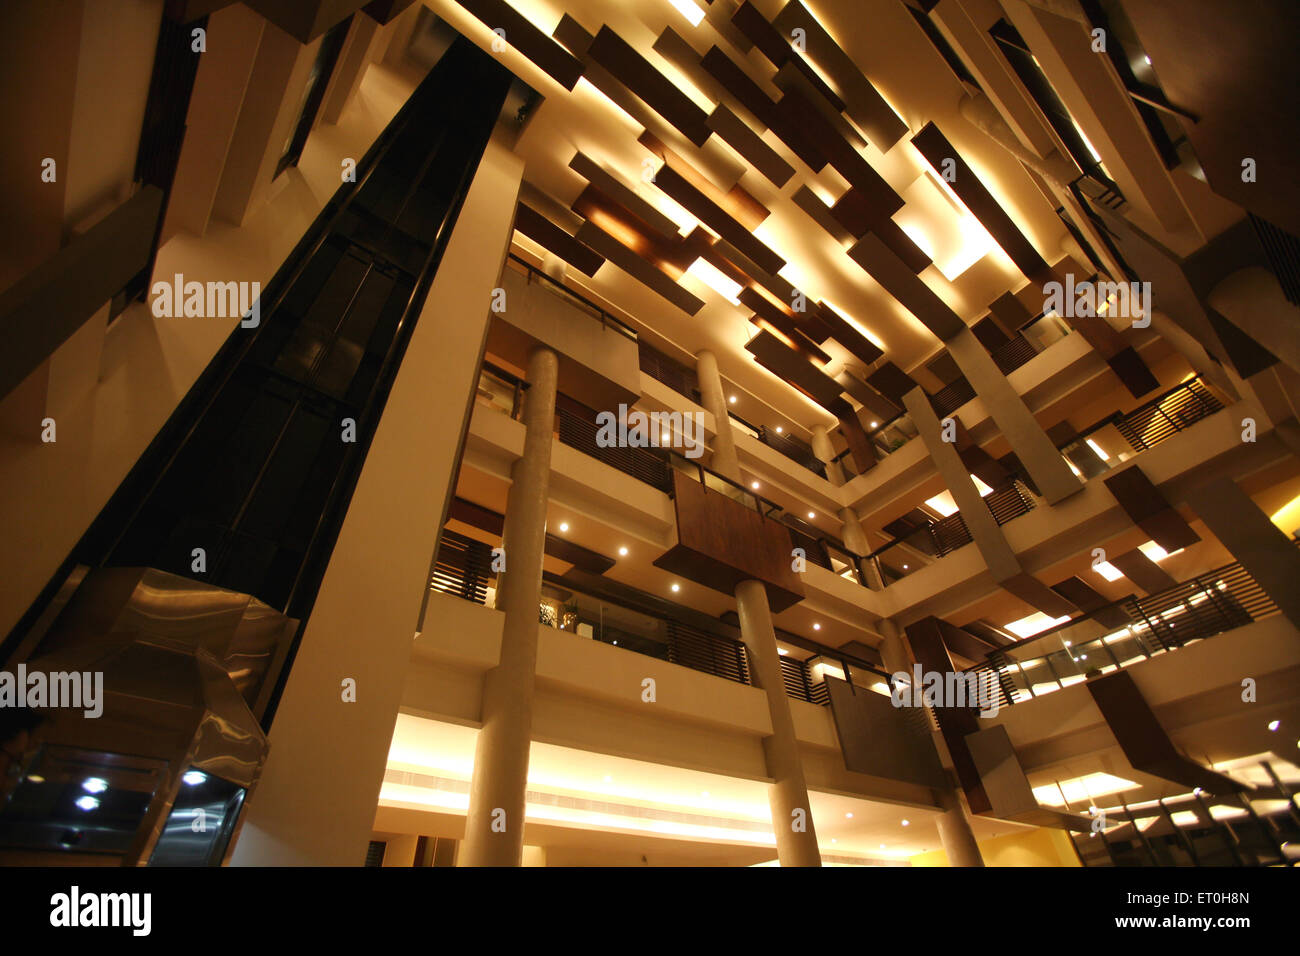 building ceiling, hotel interior, hotel ceiling, lobby ceiling, Ranchi, Jharkhand, India, Indian interiors Stock Photo